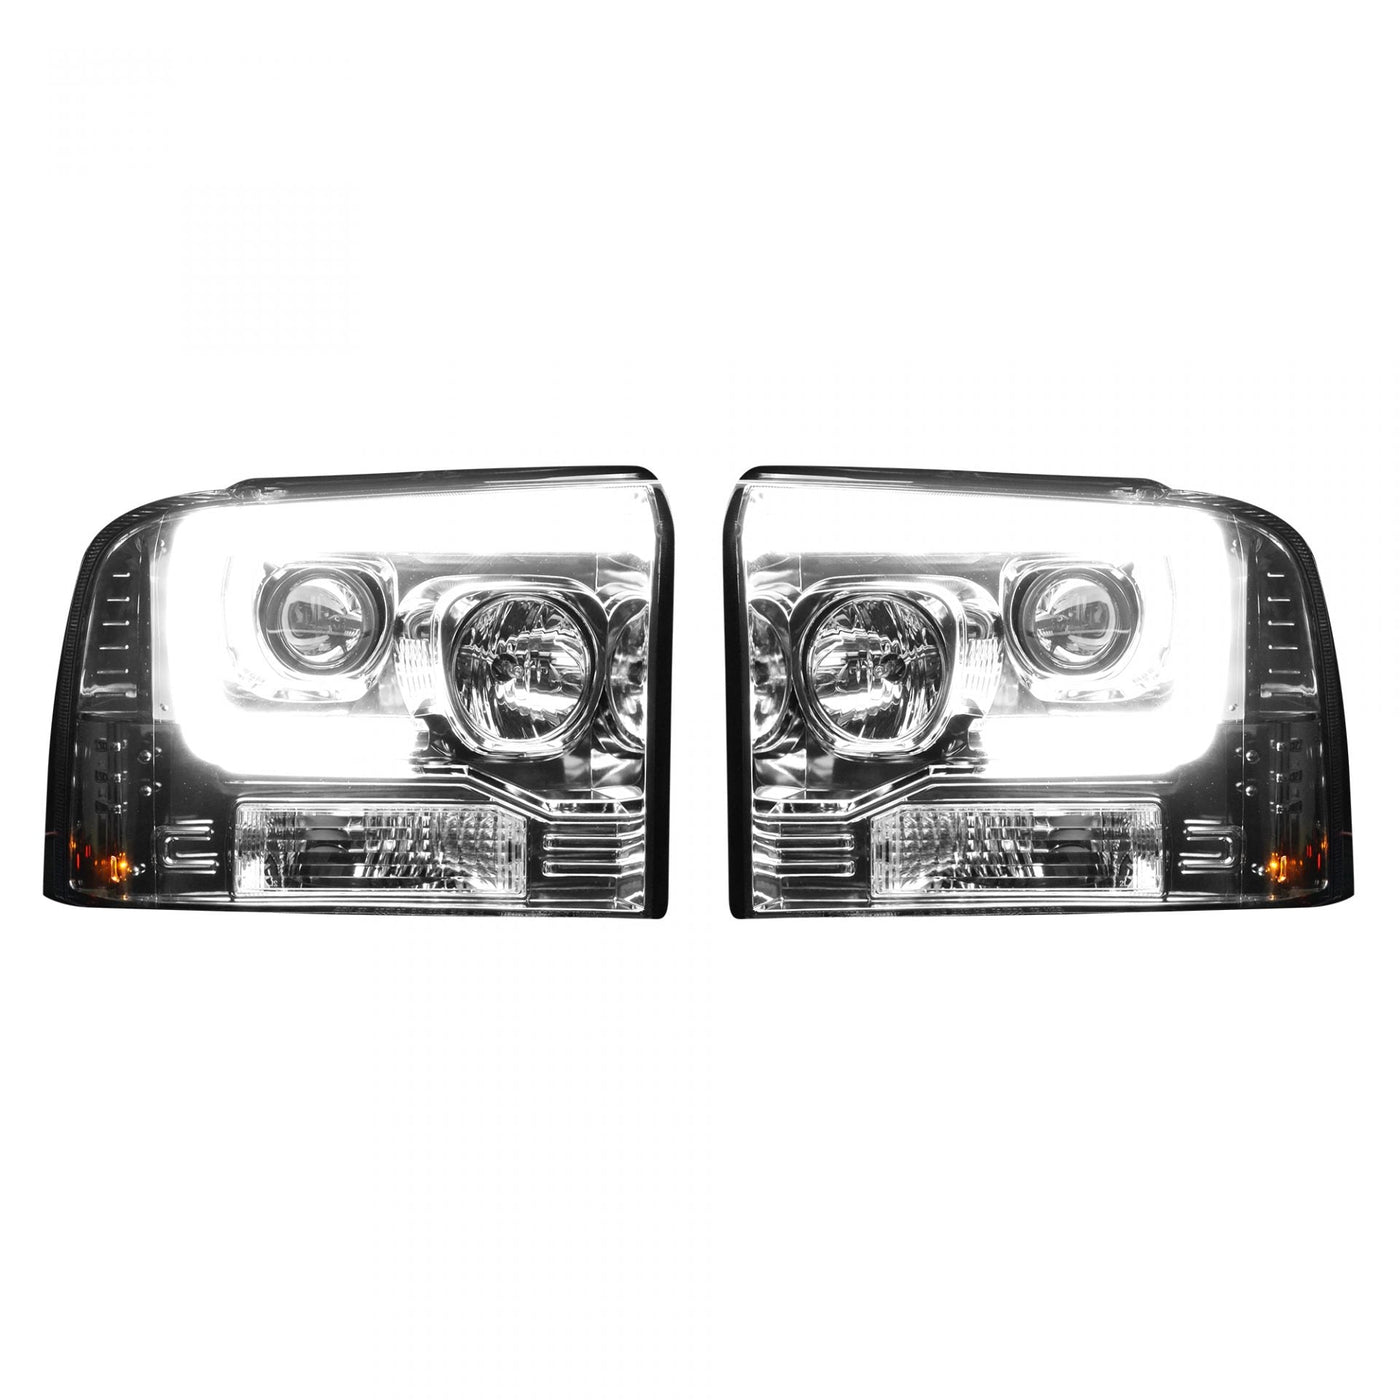 Ford Projector Headlights, Superduty Projector Headlights, Superduty 05-07 Projector Headlights, Clear/Chrome Headlights, Recon Projector Headlights